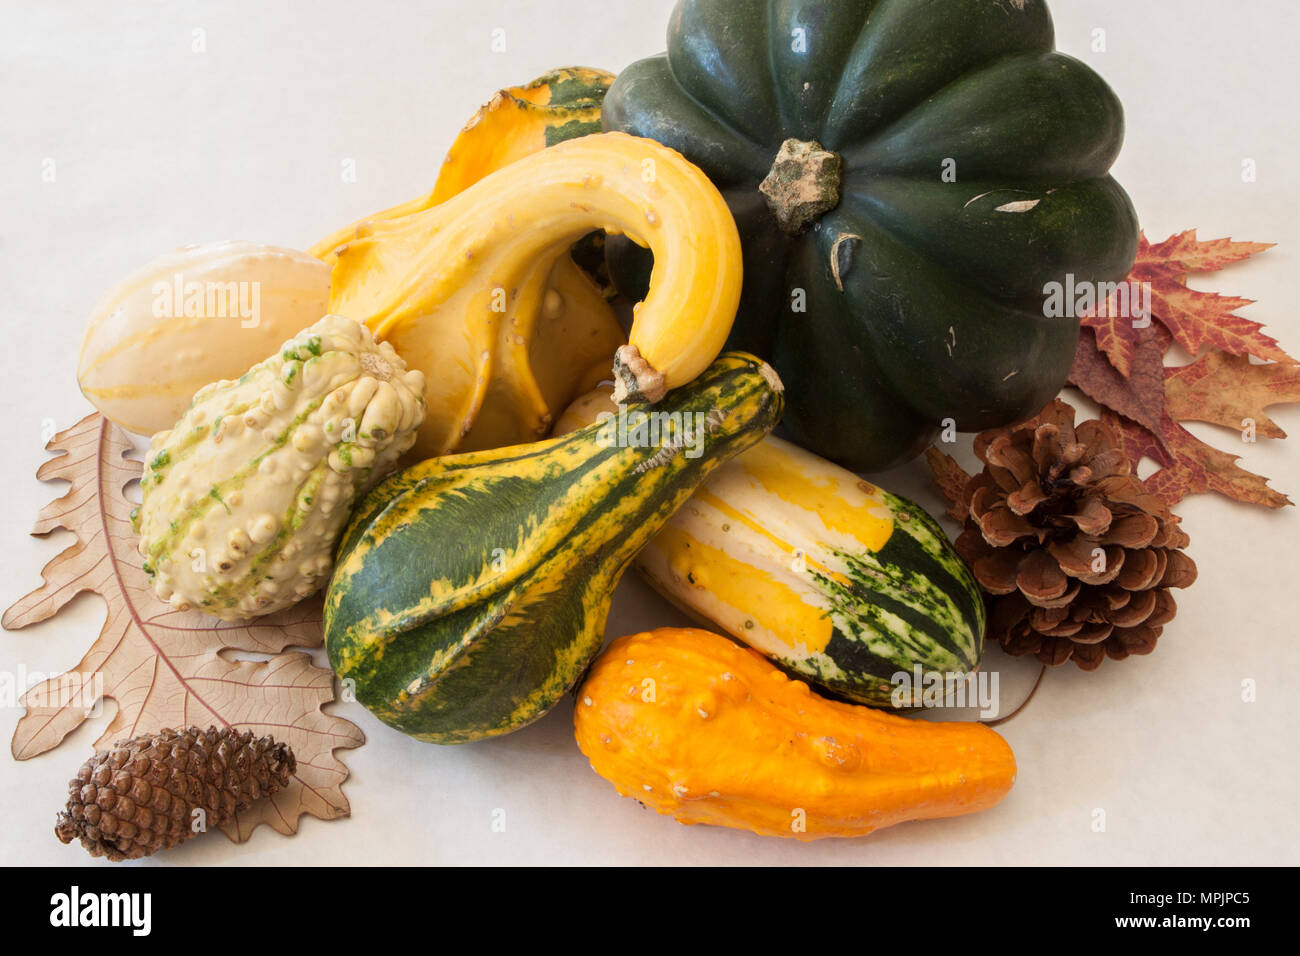 A still life of winter squash and ornamental gourds represents a bountiful harvest of nutritious foods Stock Photo